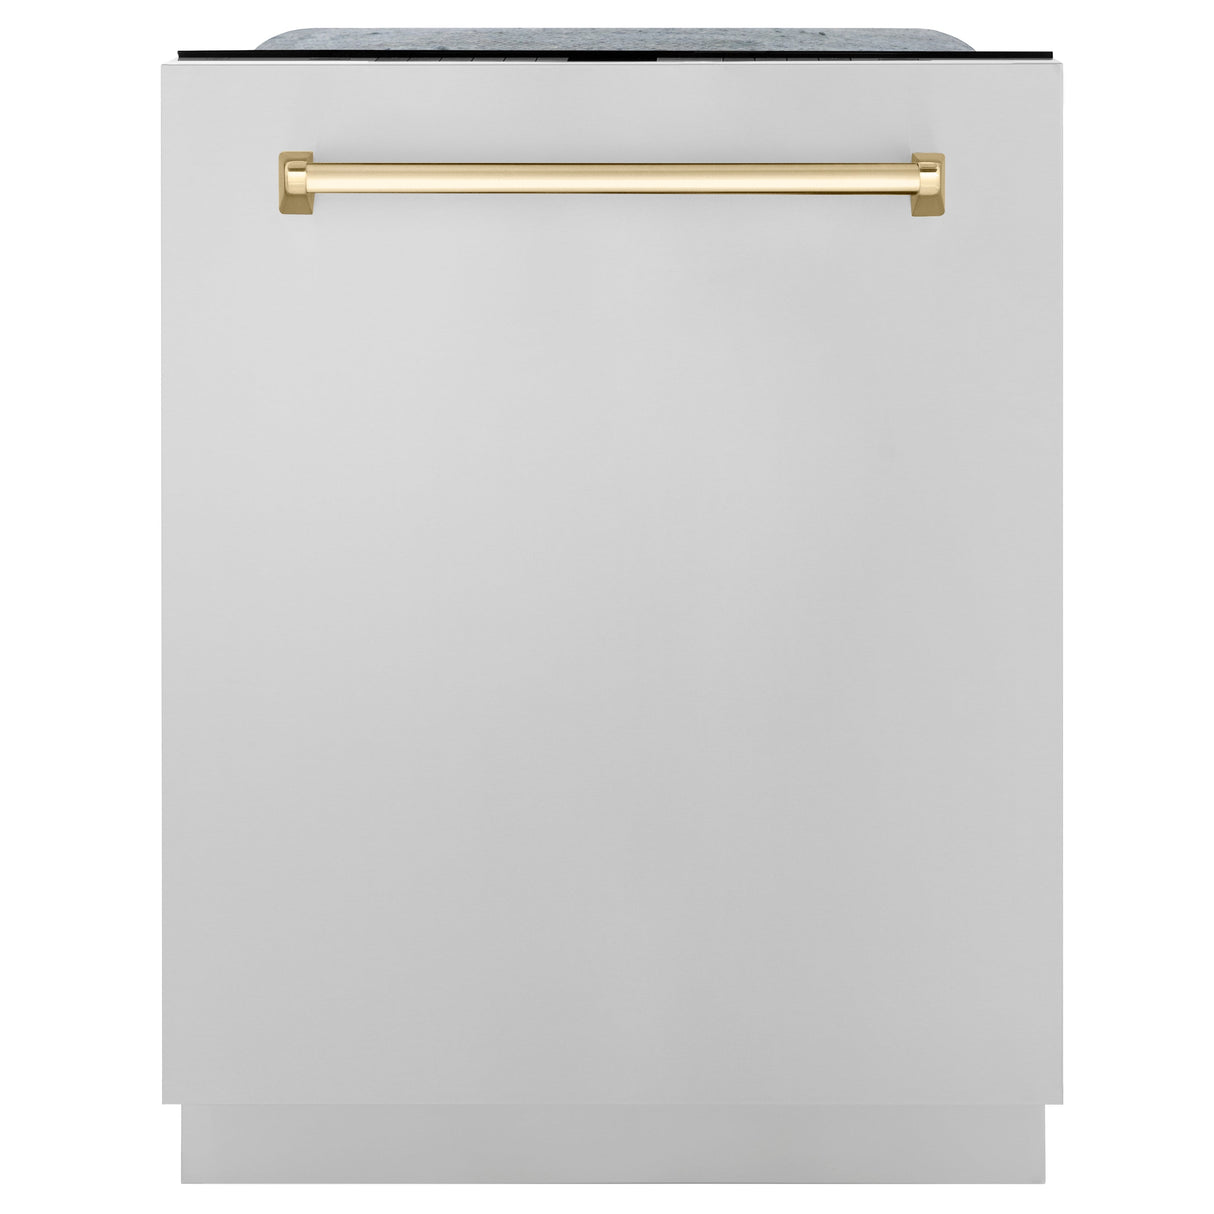 ZLINE 48 in. Autograph Edition Kitchen Package with Stainless Steel Dual Fuel Range, Range Hood, Dishwasher and Refrigeration Including External Water Dispenser with Polished Gold Accents (4AKPR-RARHDWM48-G)